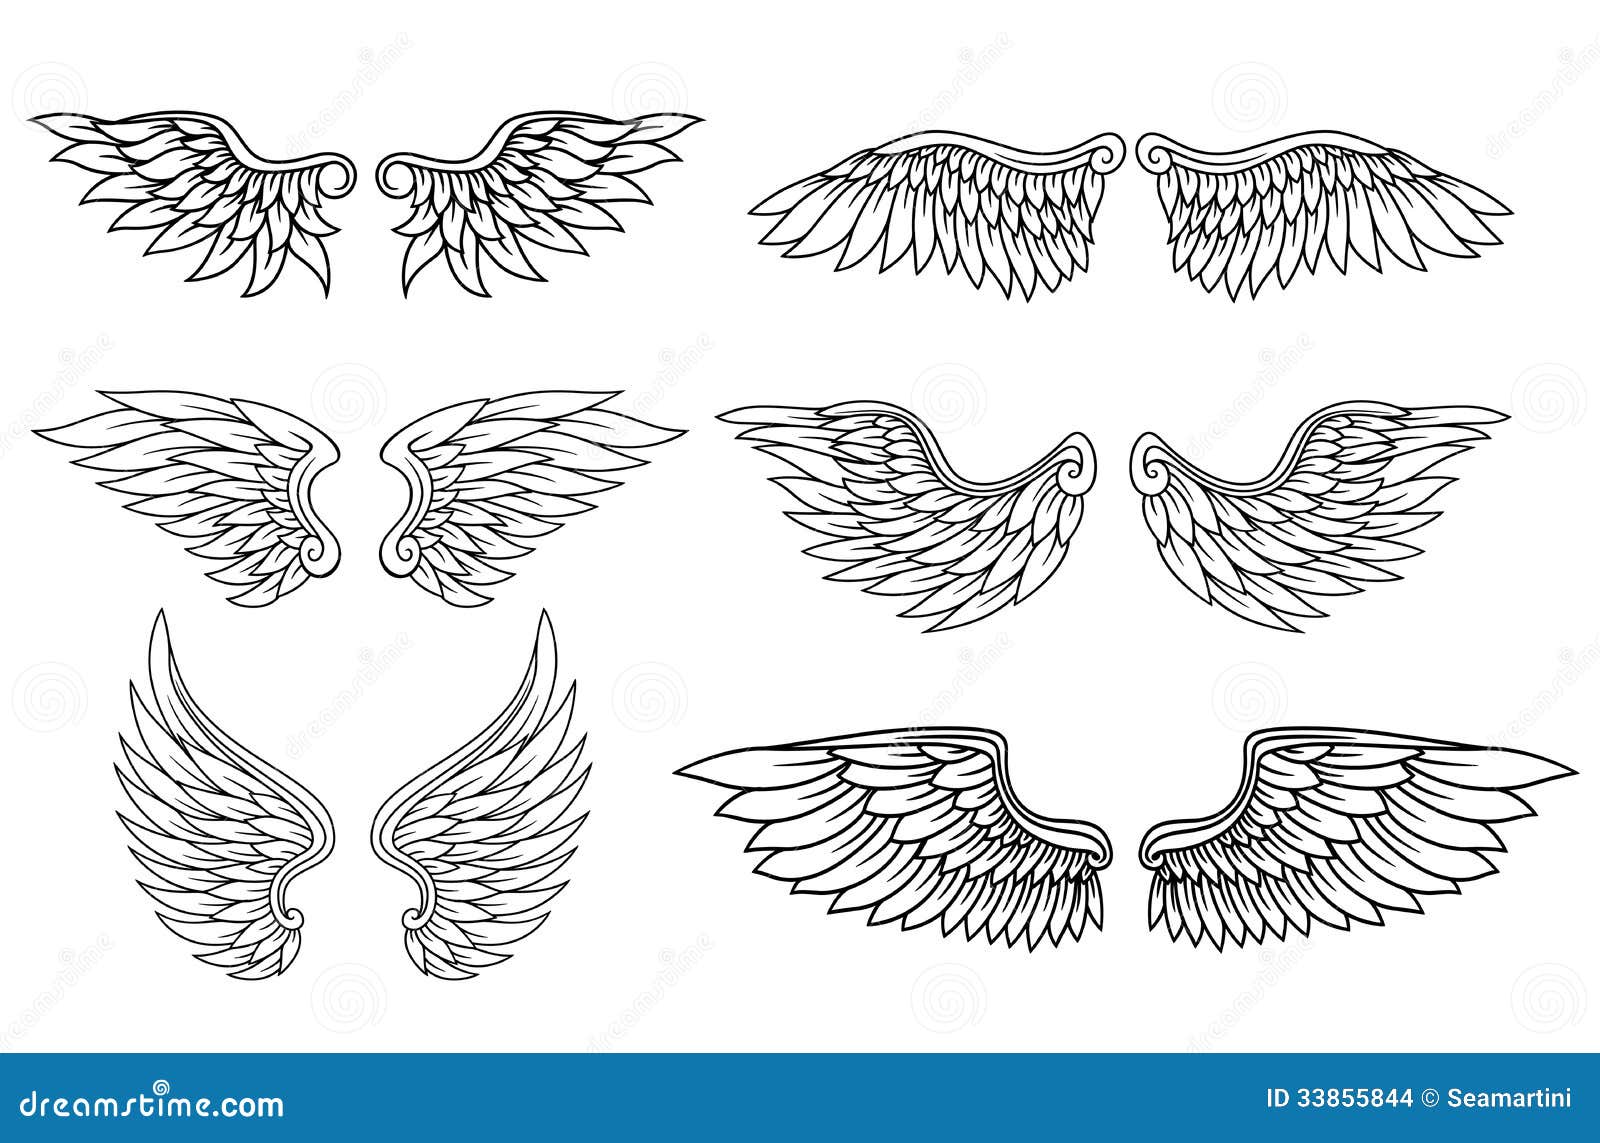 Eagle wings in tattoo style isolated on white background design element  for poster t shirt card emblem sign badge  CanStock